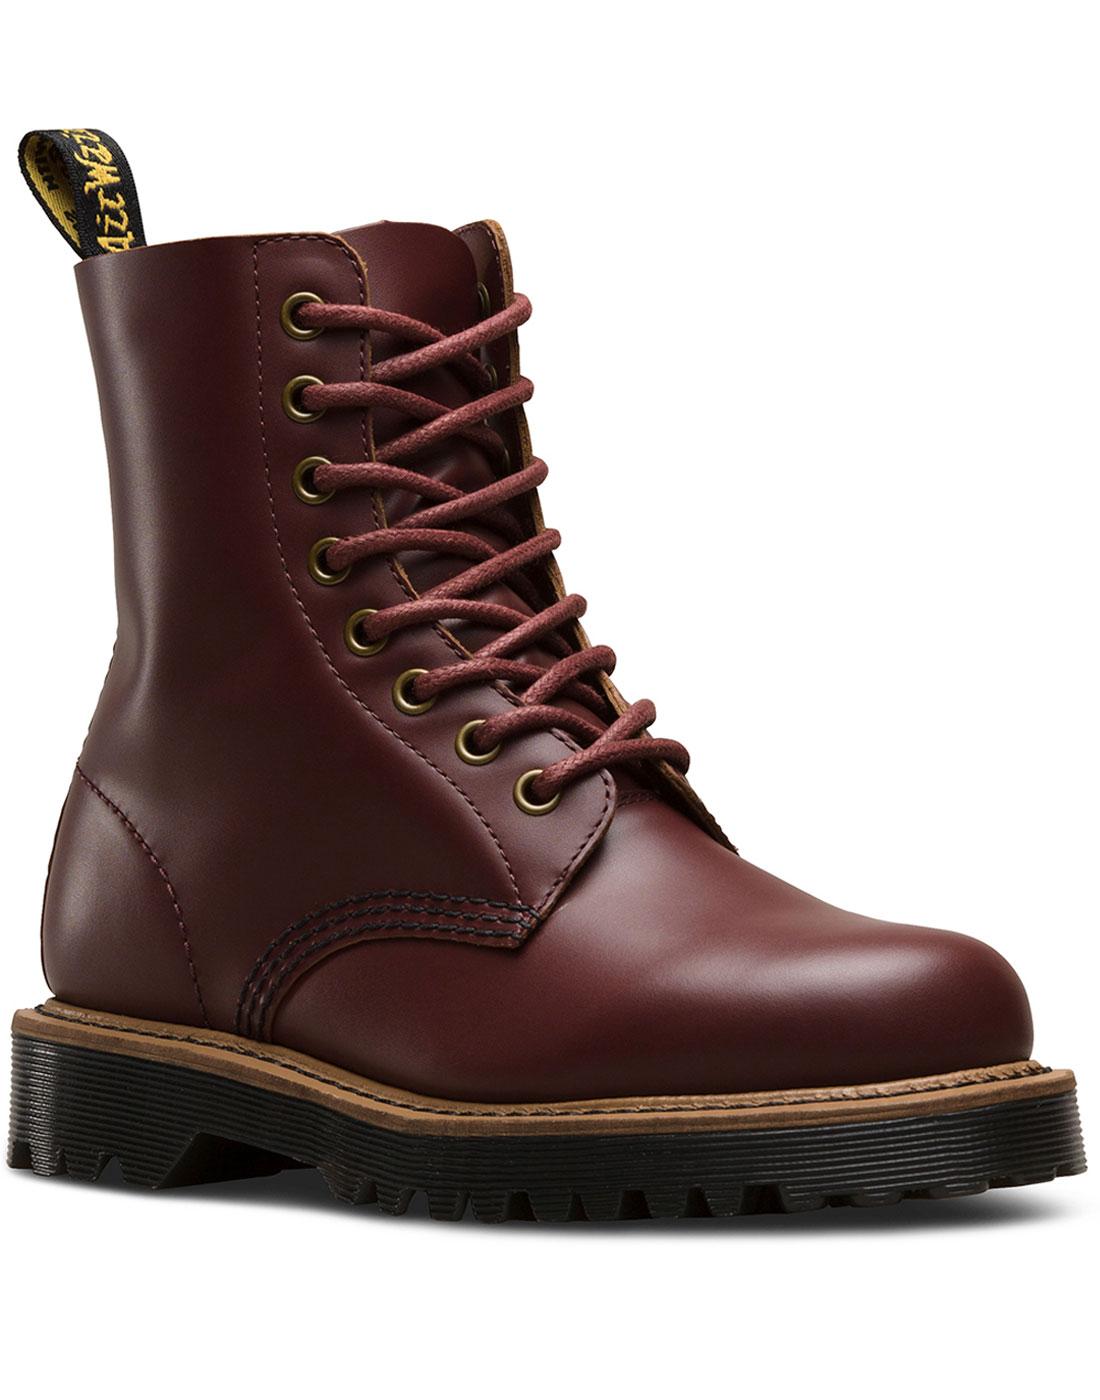 Pascal II DR MARTENS Vintage Smooth Oxblood Boots